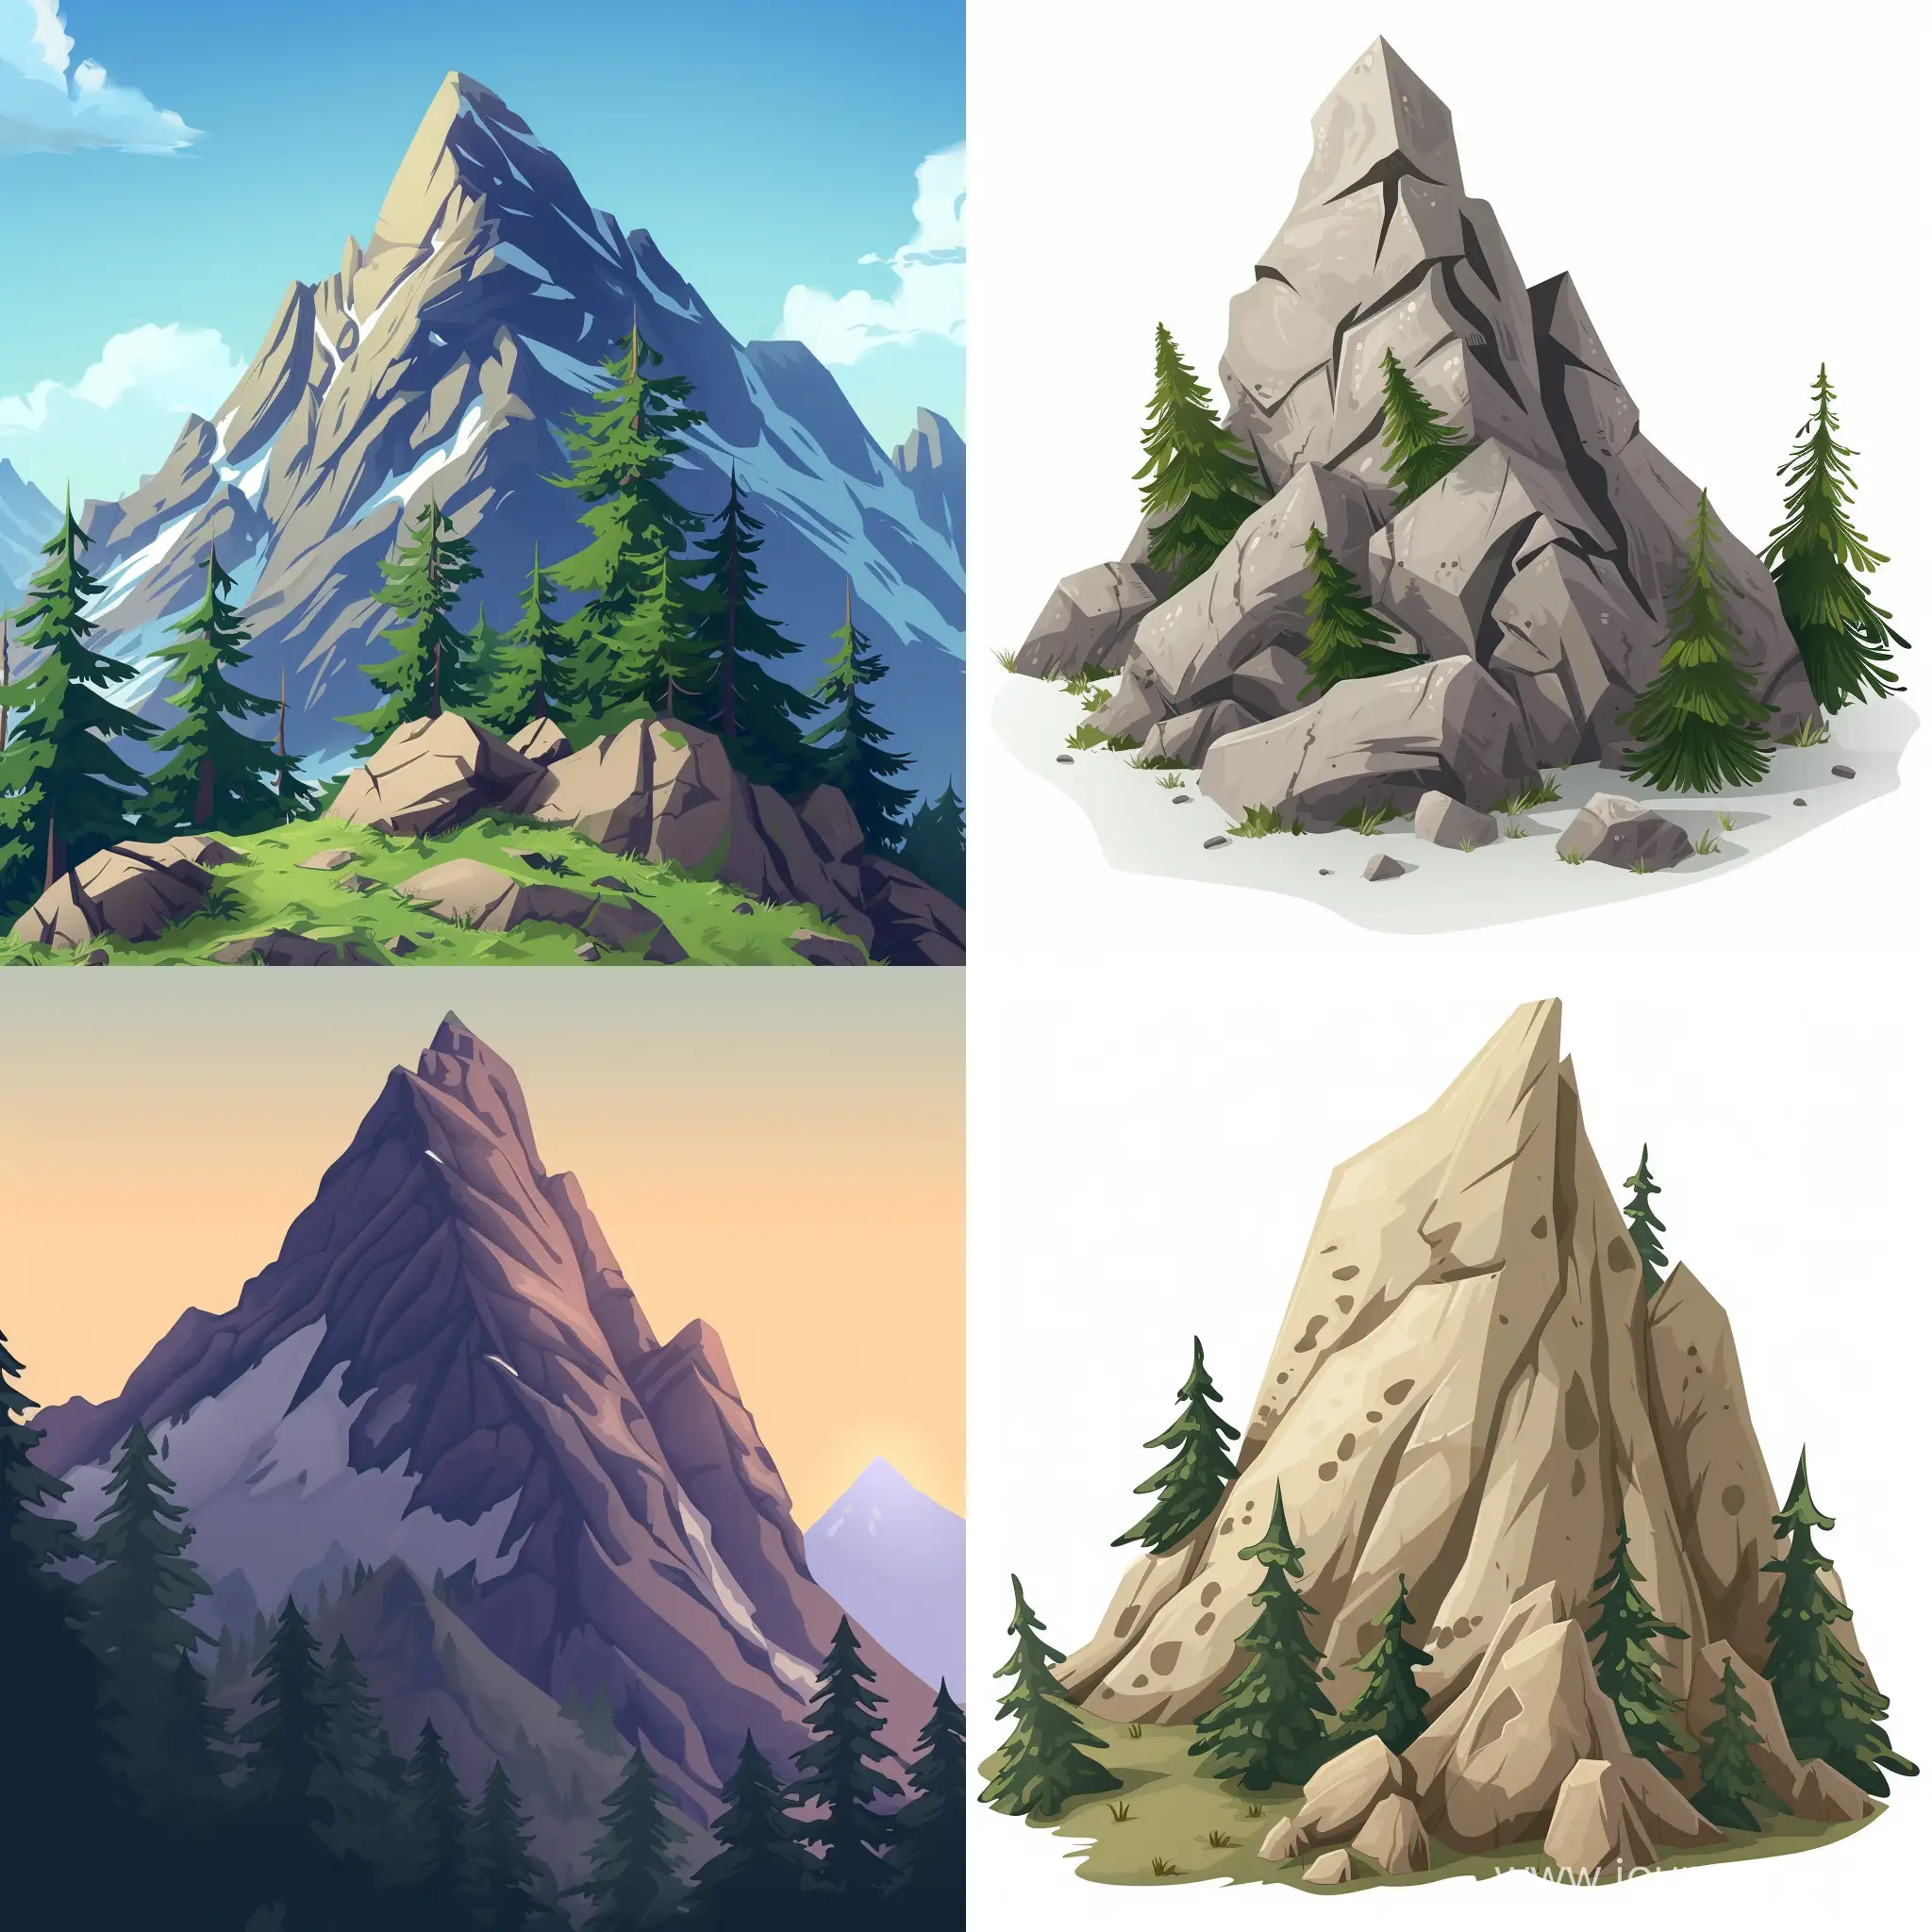 mountain peak with some trees in cartoon style, sharp edges

